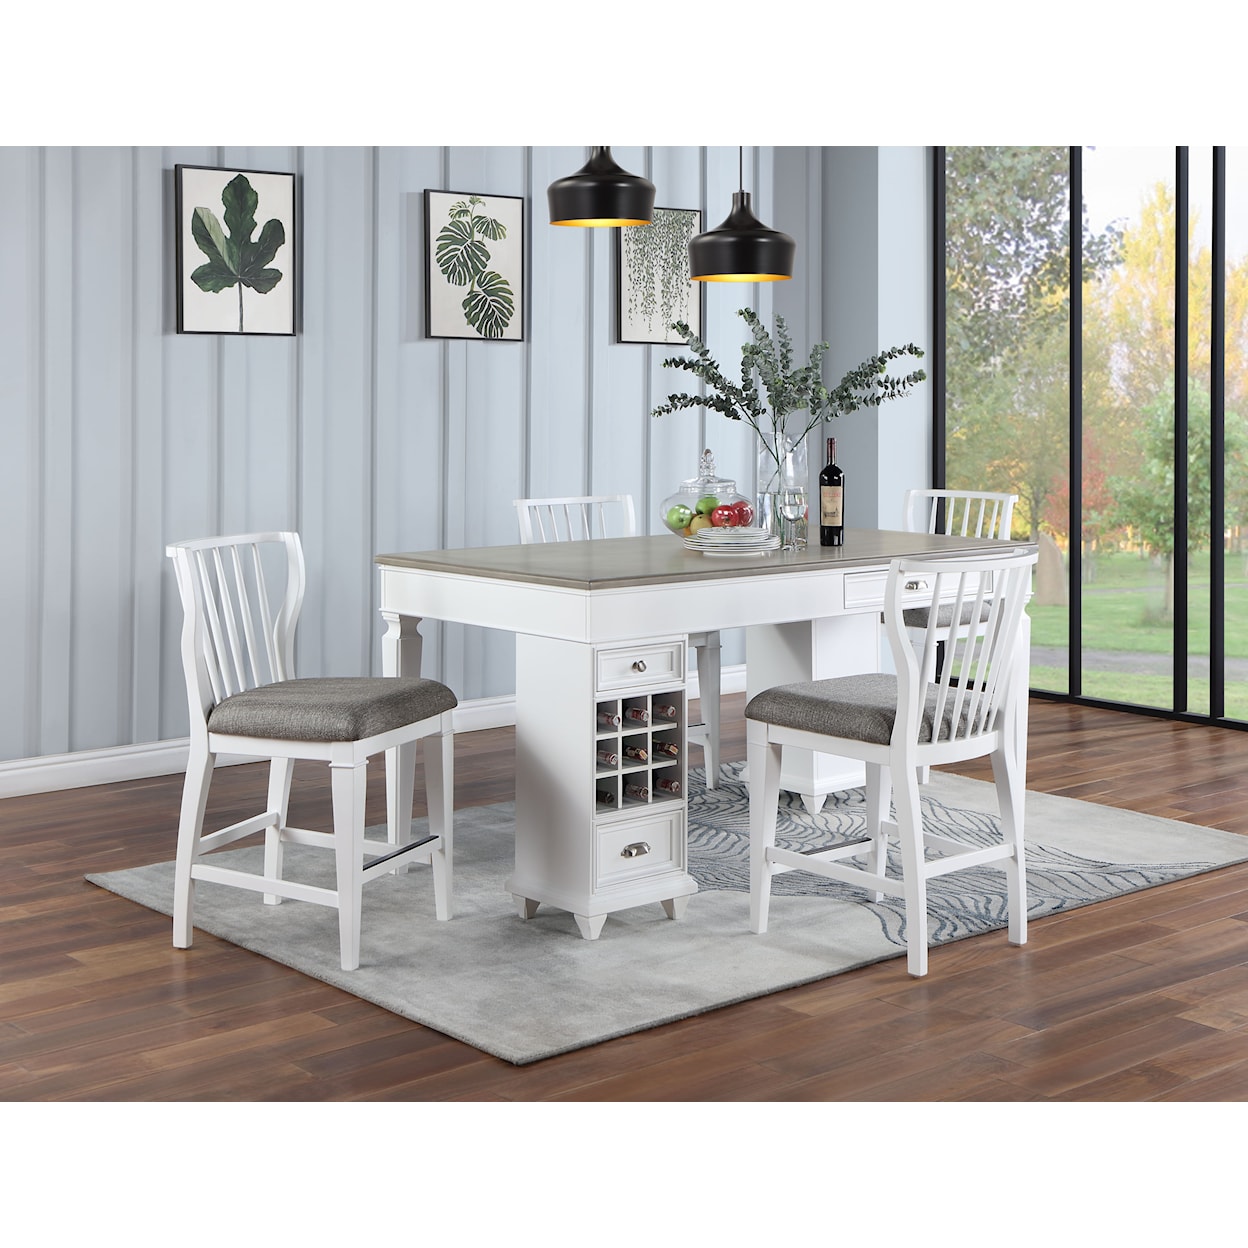 Holland House 6592 5-Piece Counter Height Dining Set